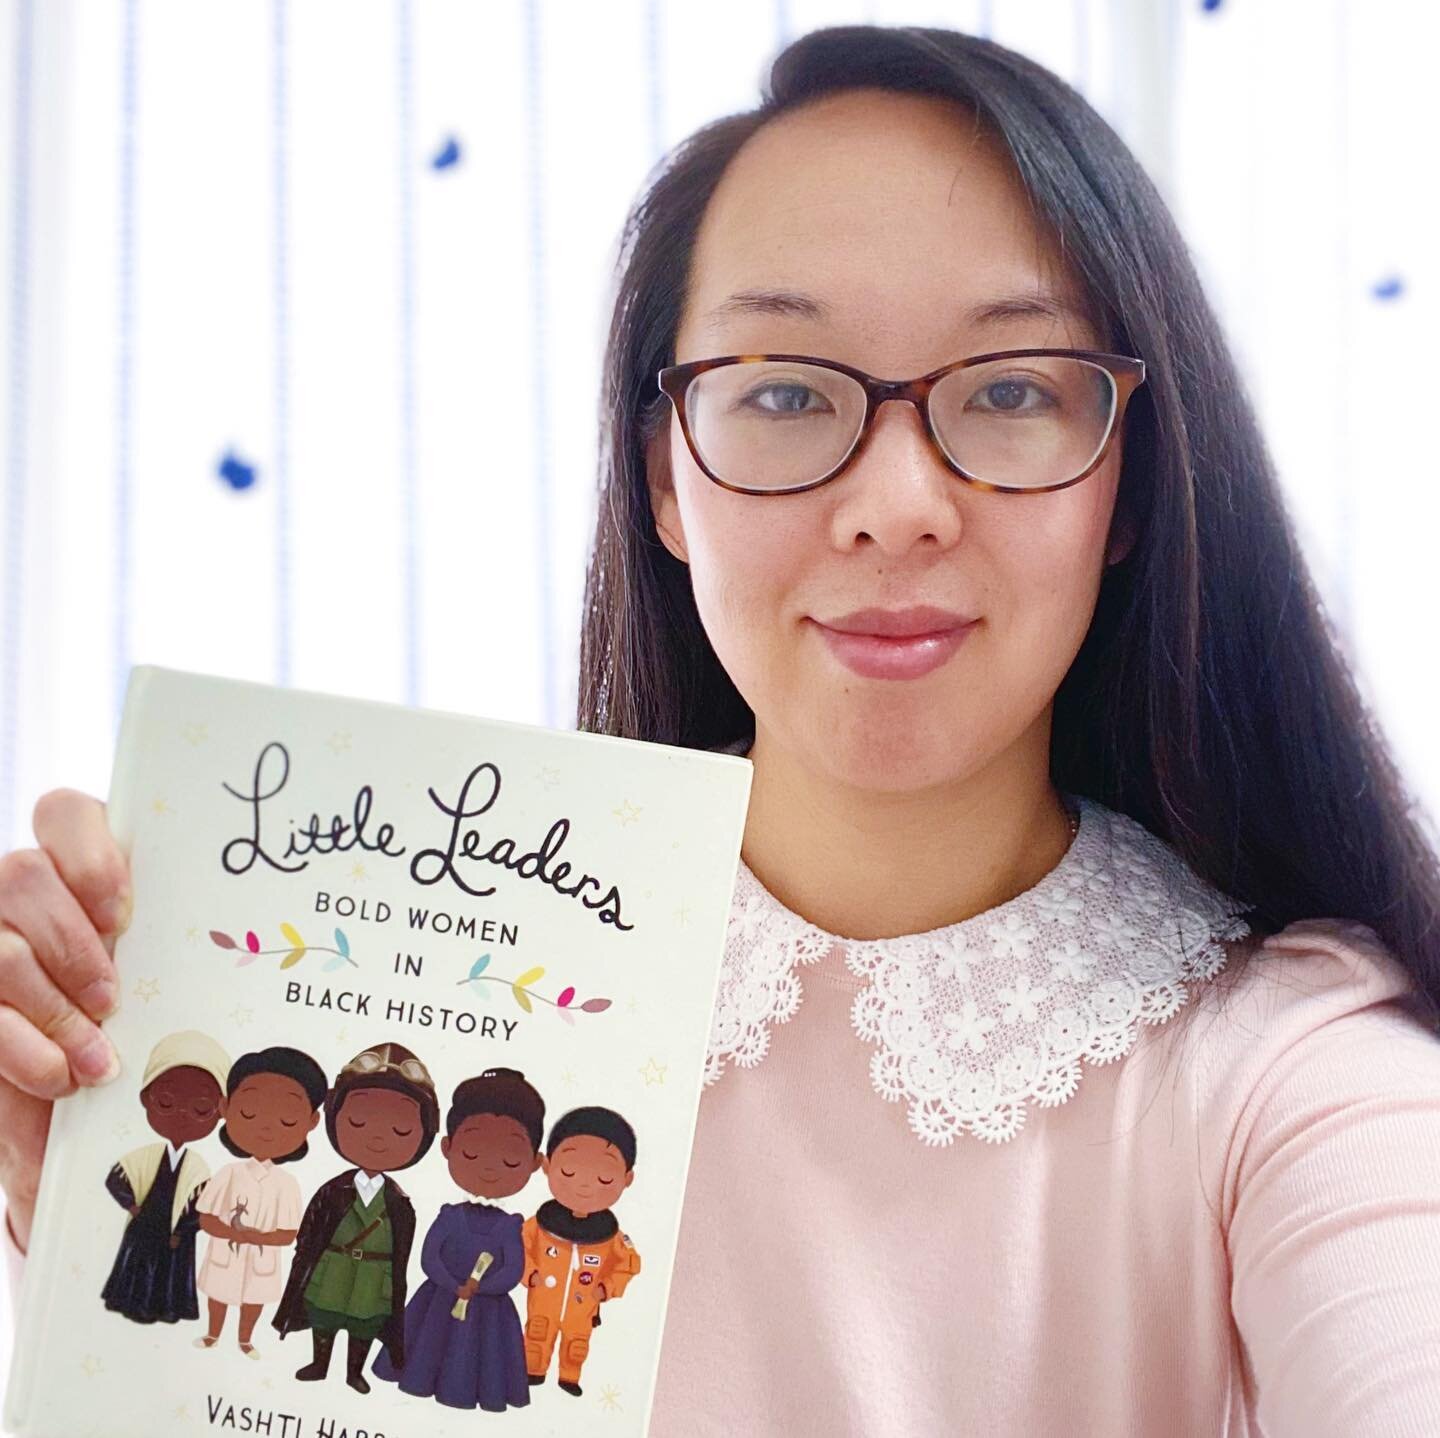 I blow dried my hair and put on makeup yesterday fo record a couple work videos so I had to document this momentous occasion on IG!⁣
⁣
In other news the Overlord and I&rsquo;ve been making our way through Vashti Harrison&rsquo;s book, Little Leaders: